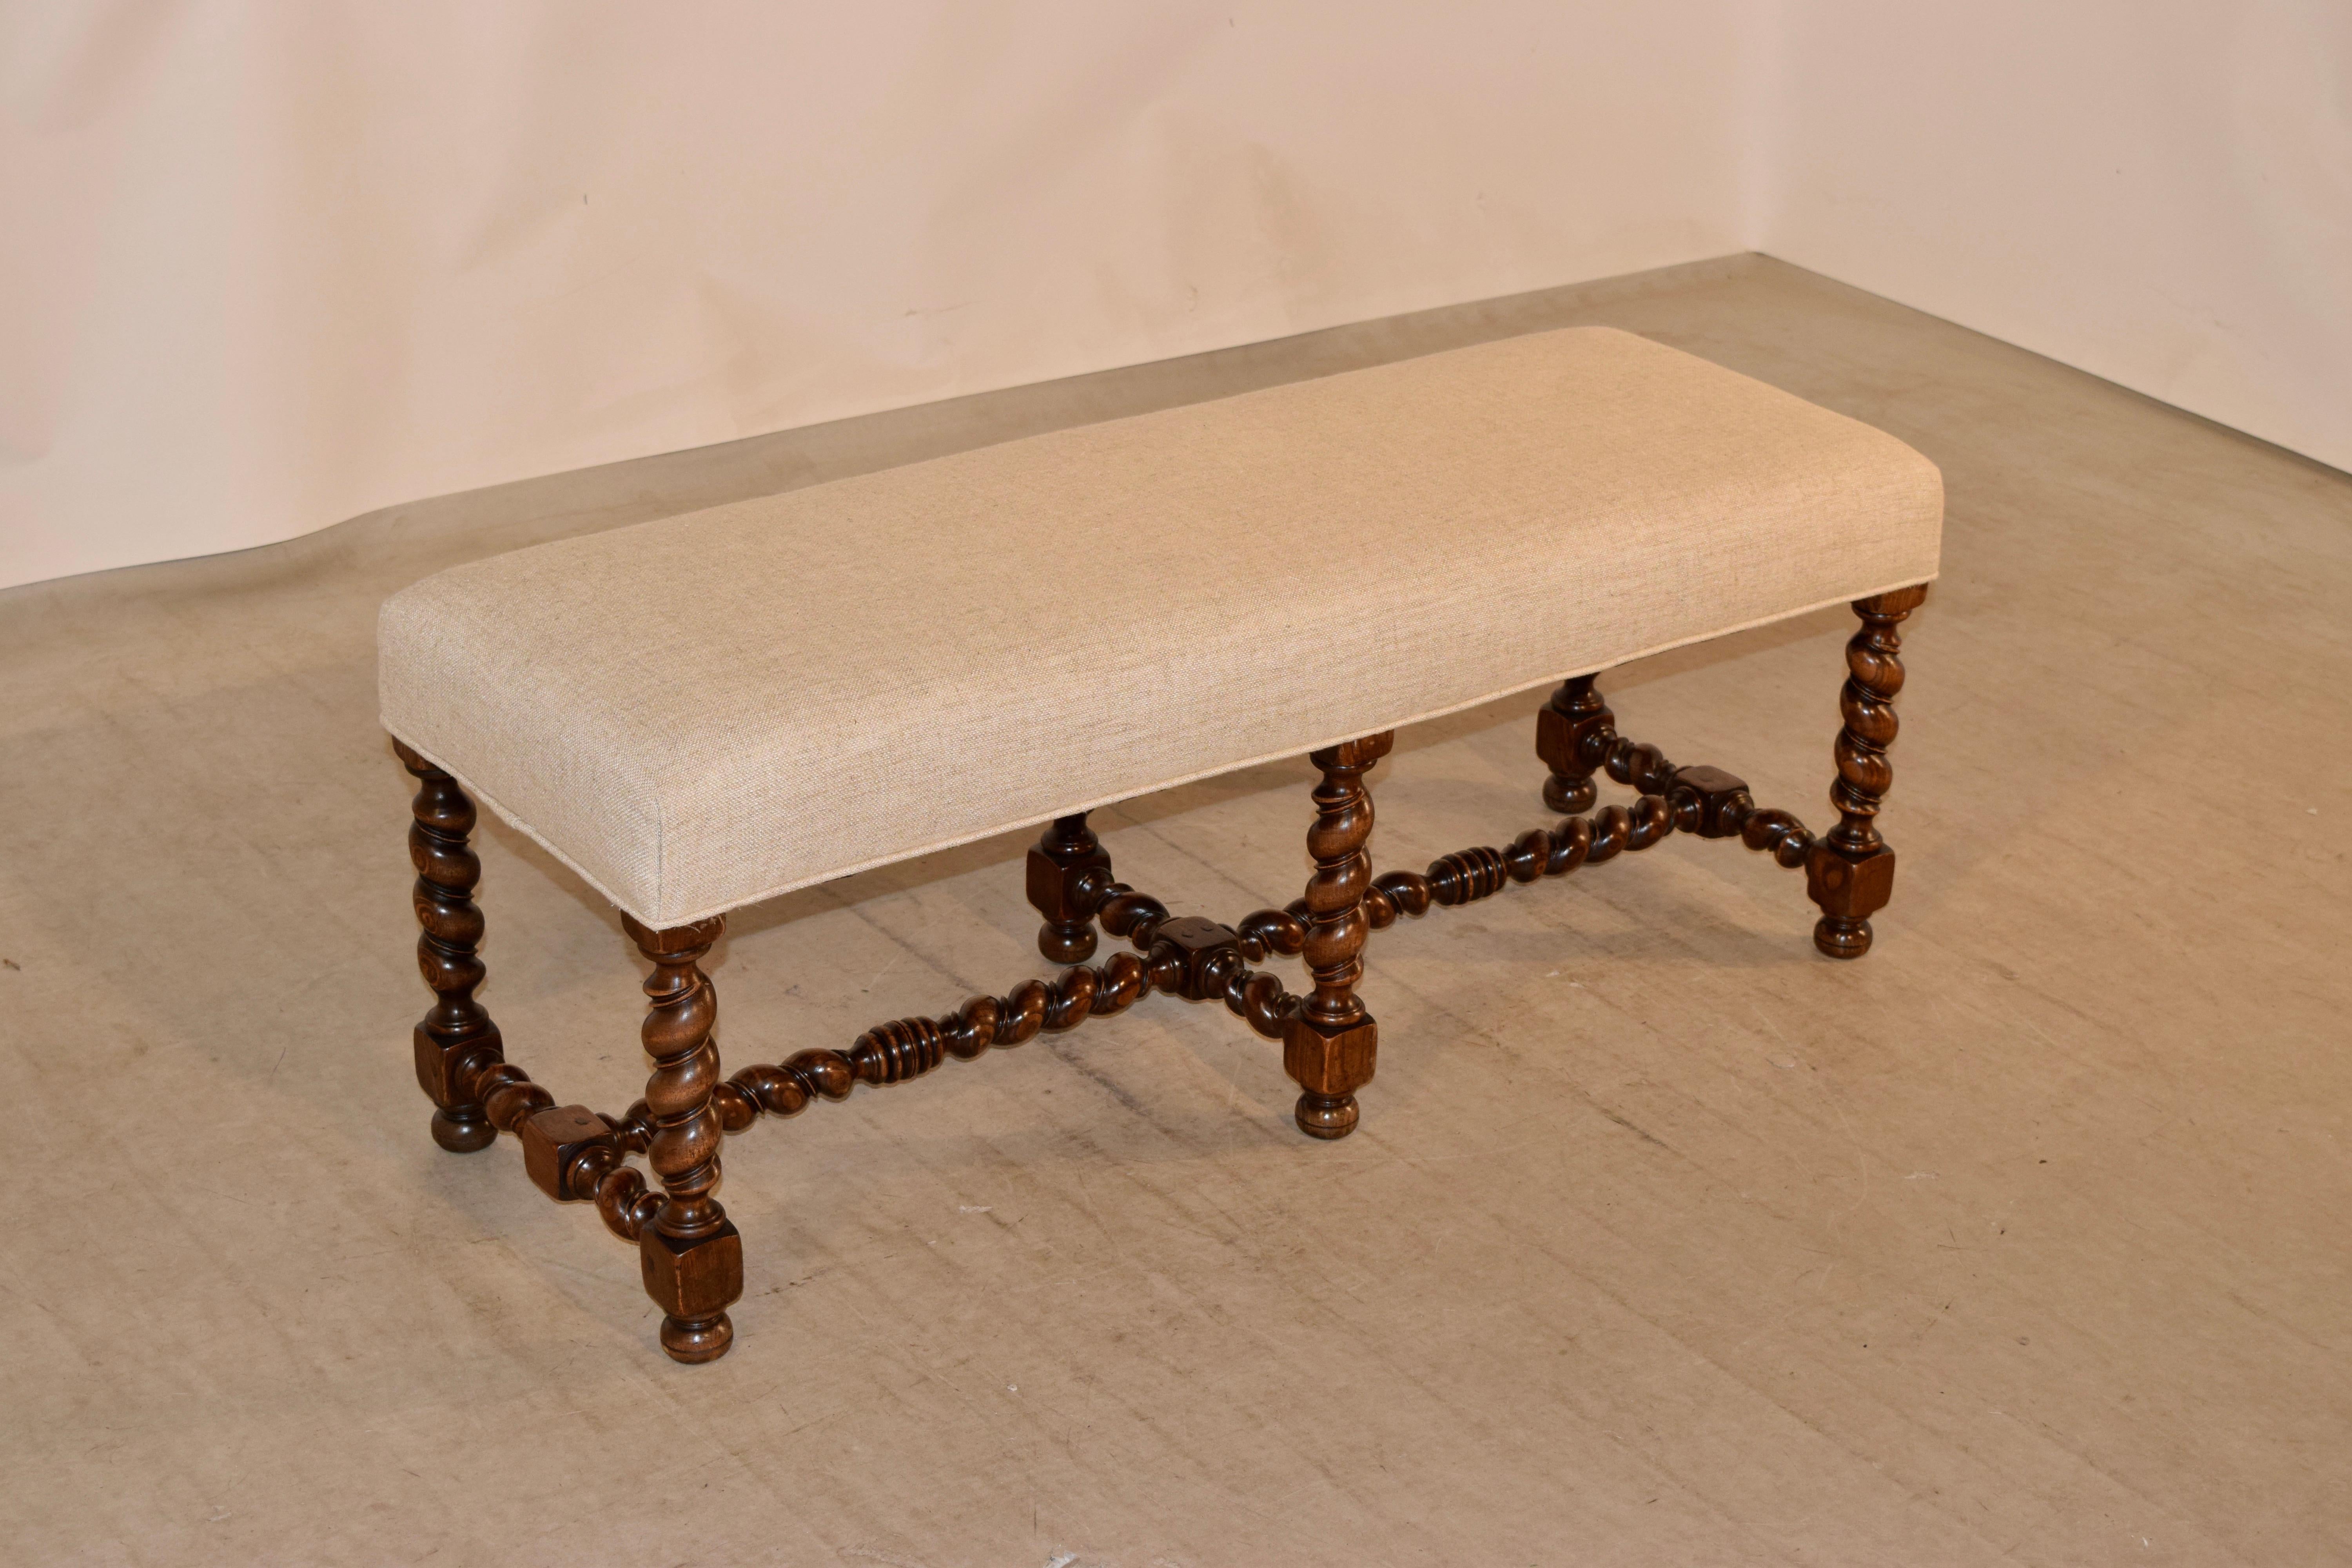 19th century upholstered bench from France with a newly upholstered seat in linen with single welt decoration. The frame is made from walnut, and the legs are hand-turned vine twist, which are fantastic and much more unusual than barley twist. The